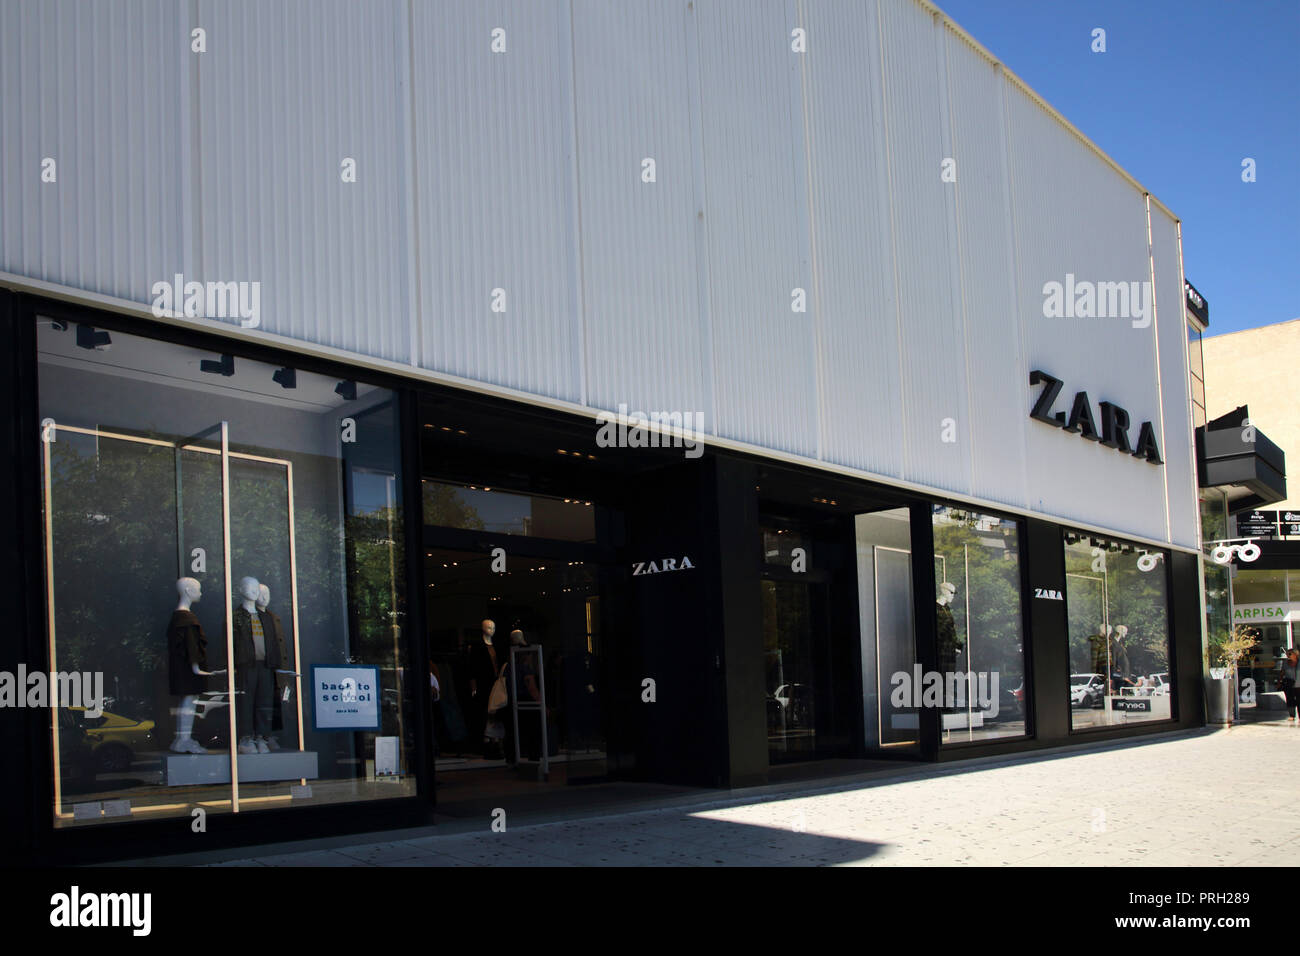 Zara Fashion High Resolution Stock Photography and Images - Alamy